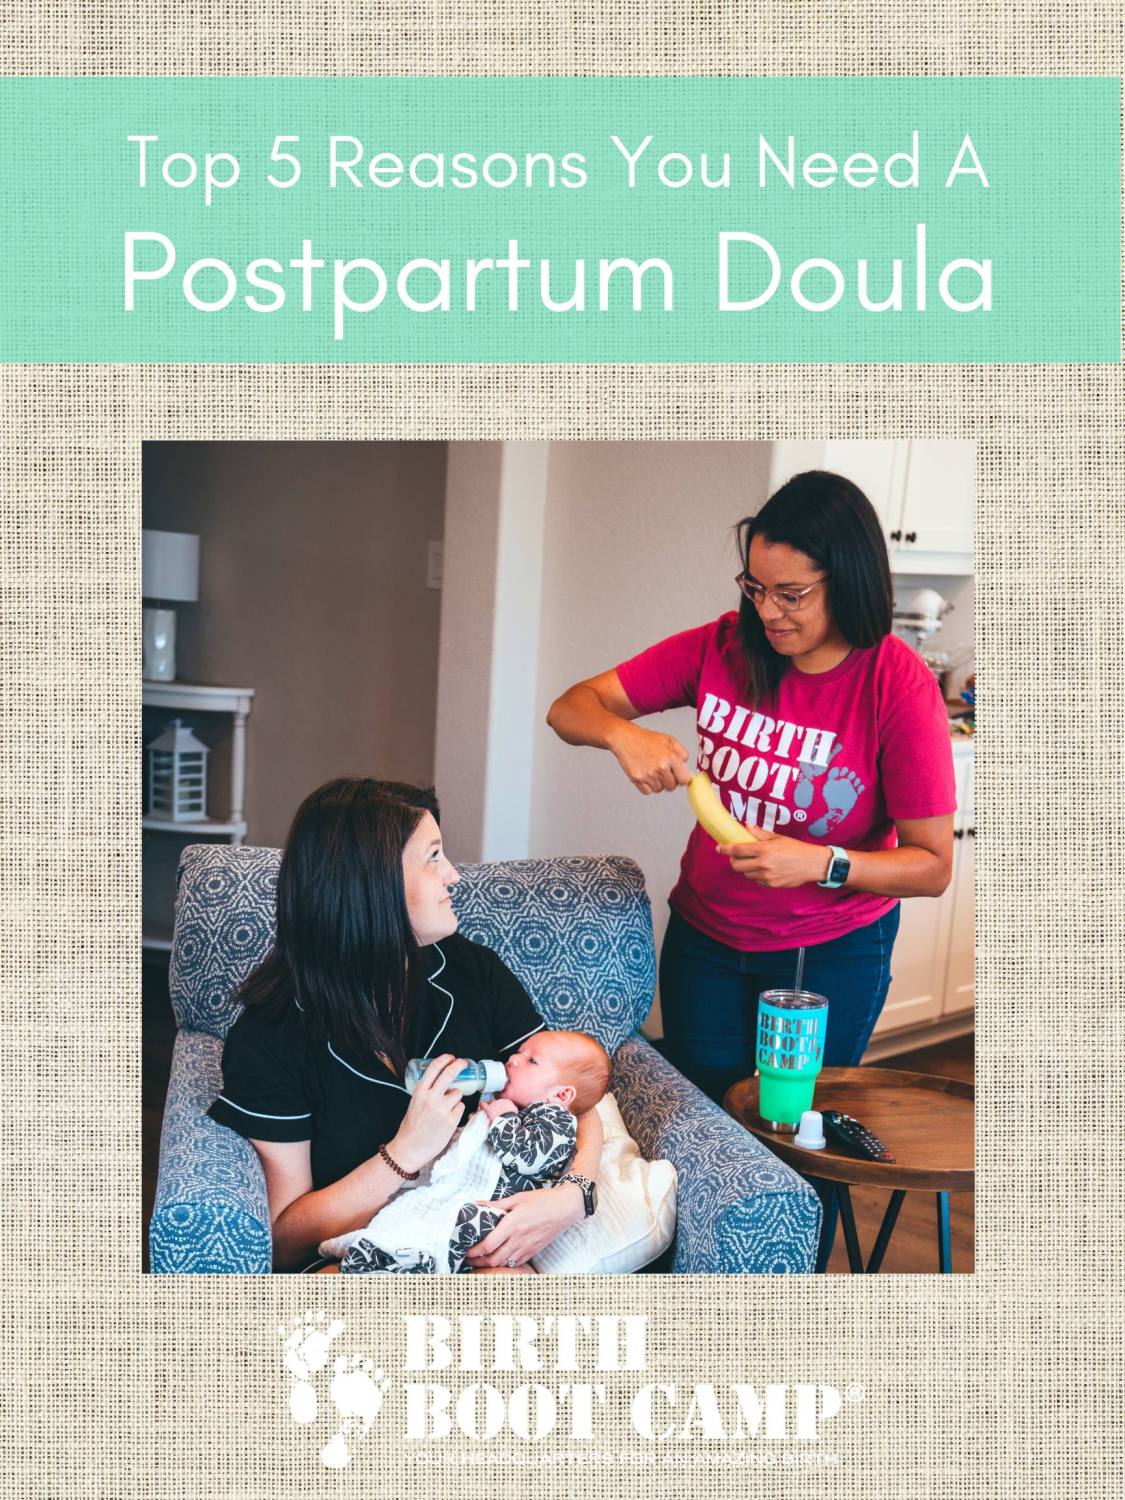 Top 5 Reasons You Need a Postpartum Doula